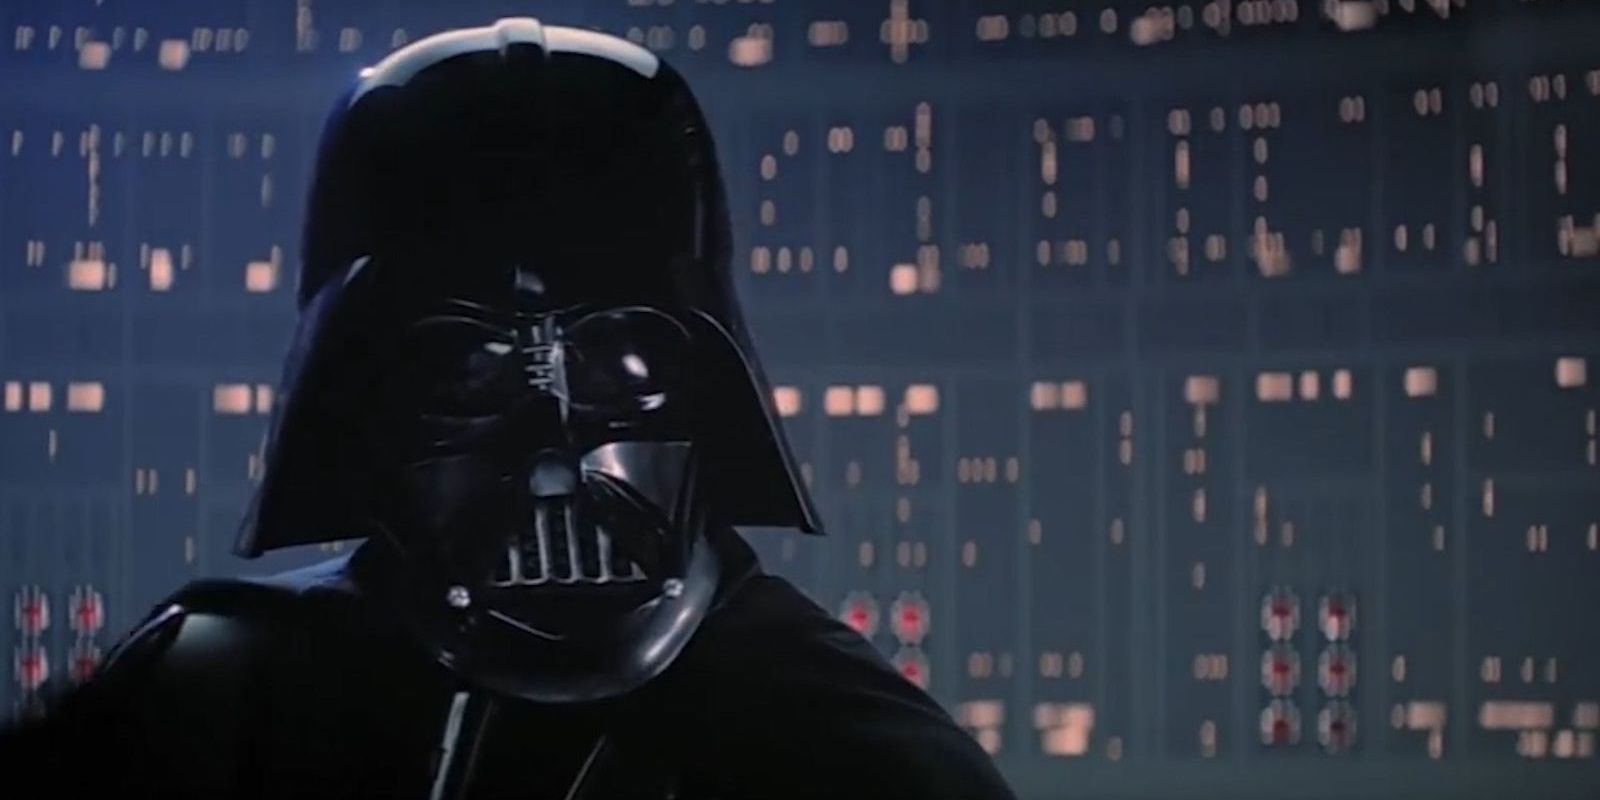 Vader tells Luke 'I am your father' in The Empire Strikes Back